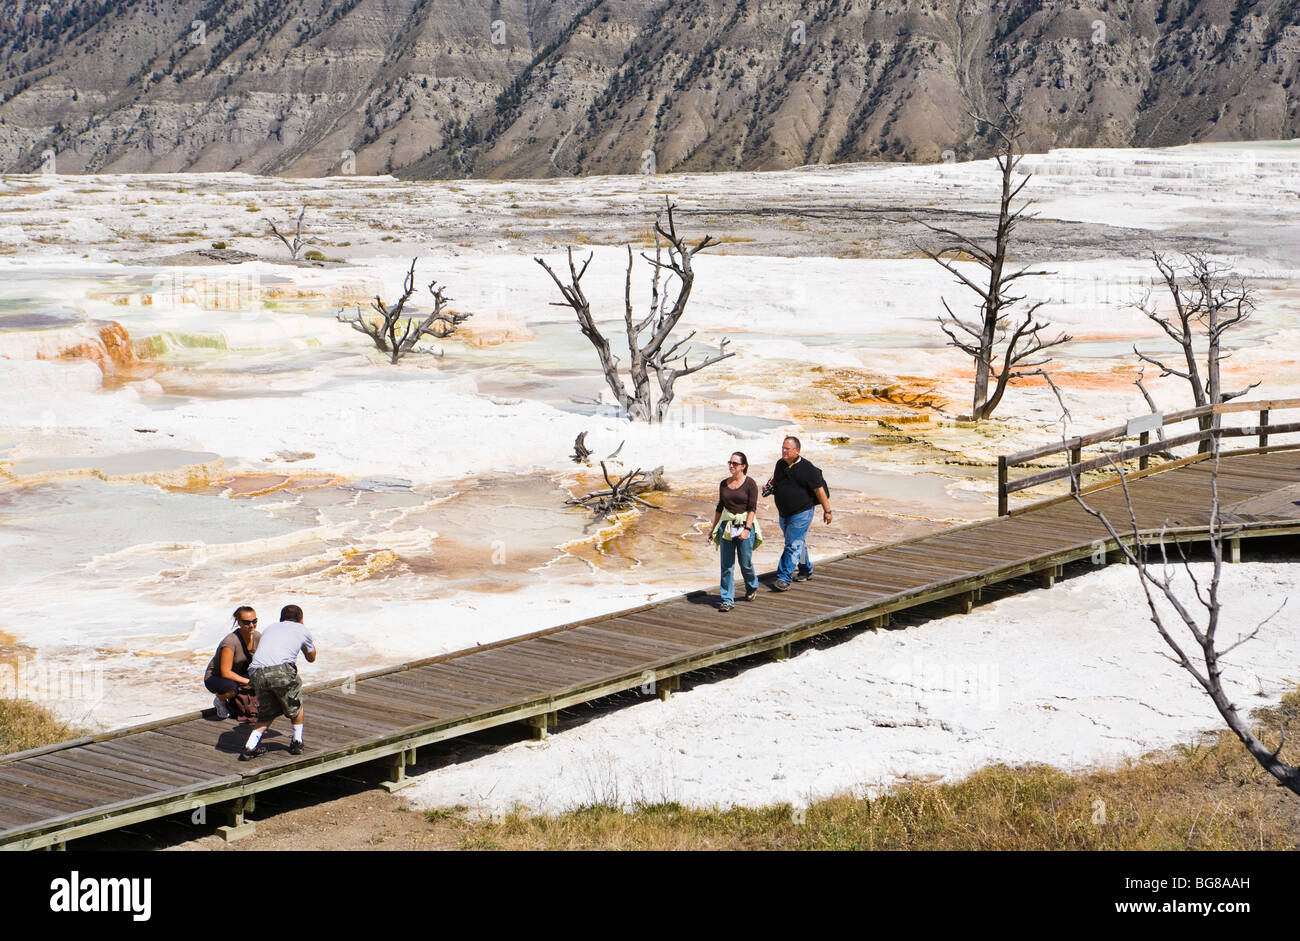 Tourists walking on the boardwalks on the main terrace of Mammoth Hot Springs, Yellowstone national Park, Wyoming, USA. Stock Photo